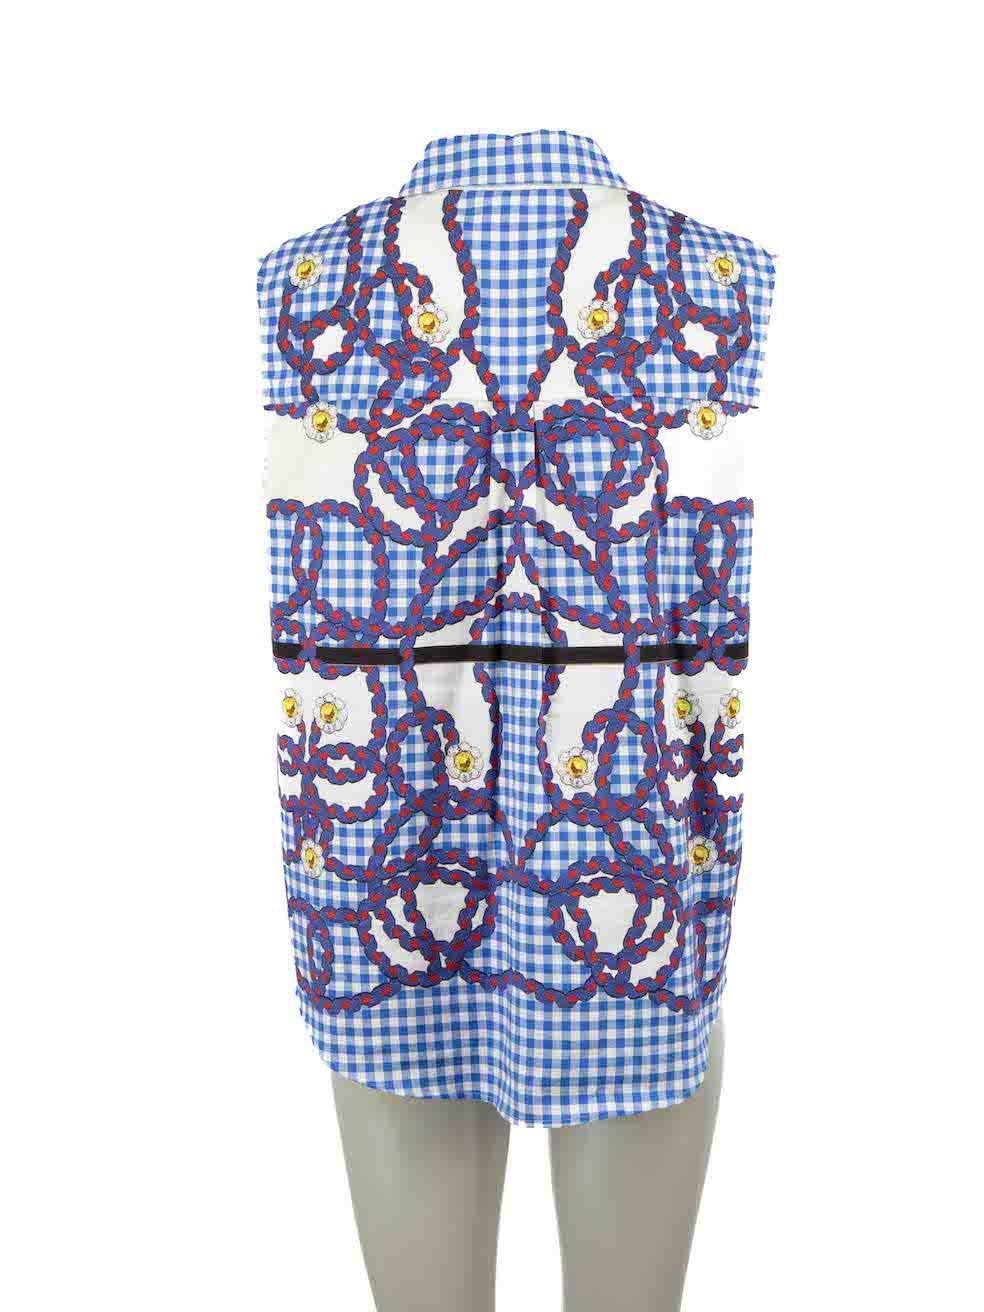 Mary Katrantzou Blue Gingham Sleeveless Shirt Size L In Good Condition For Sale In London, GB